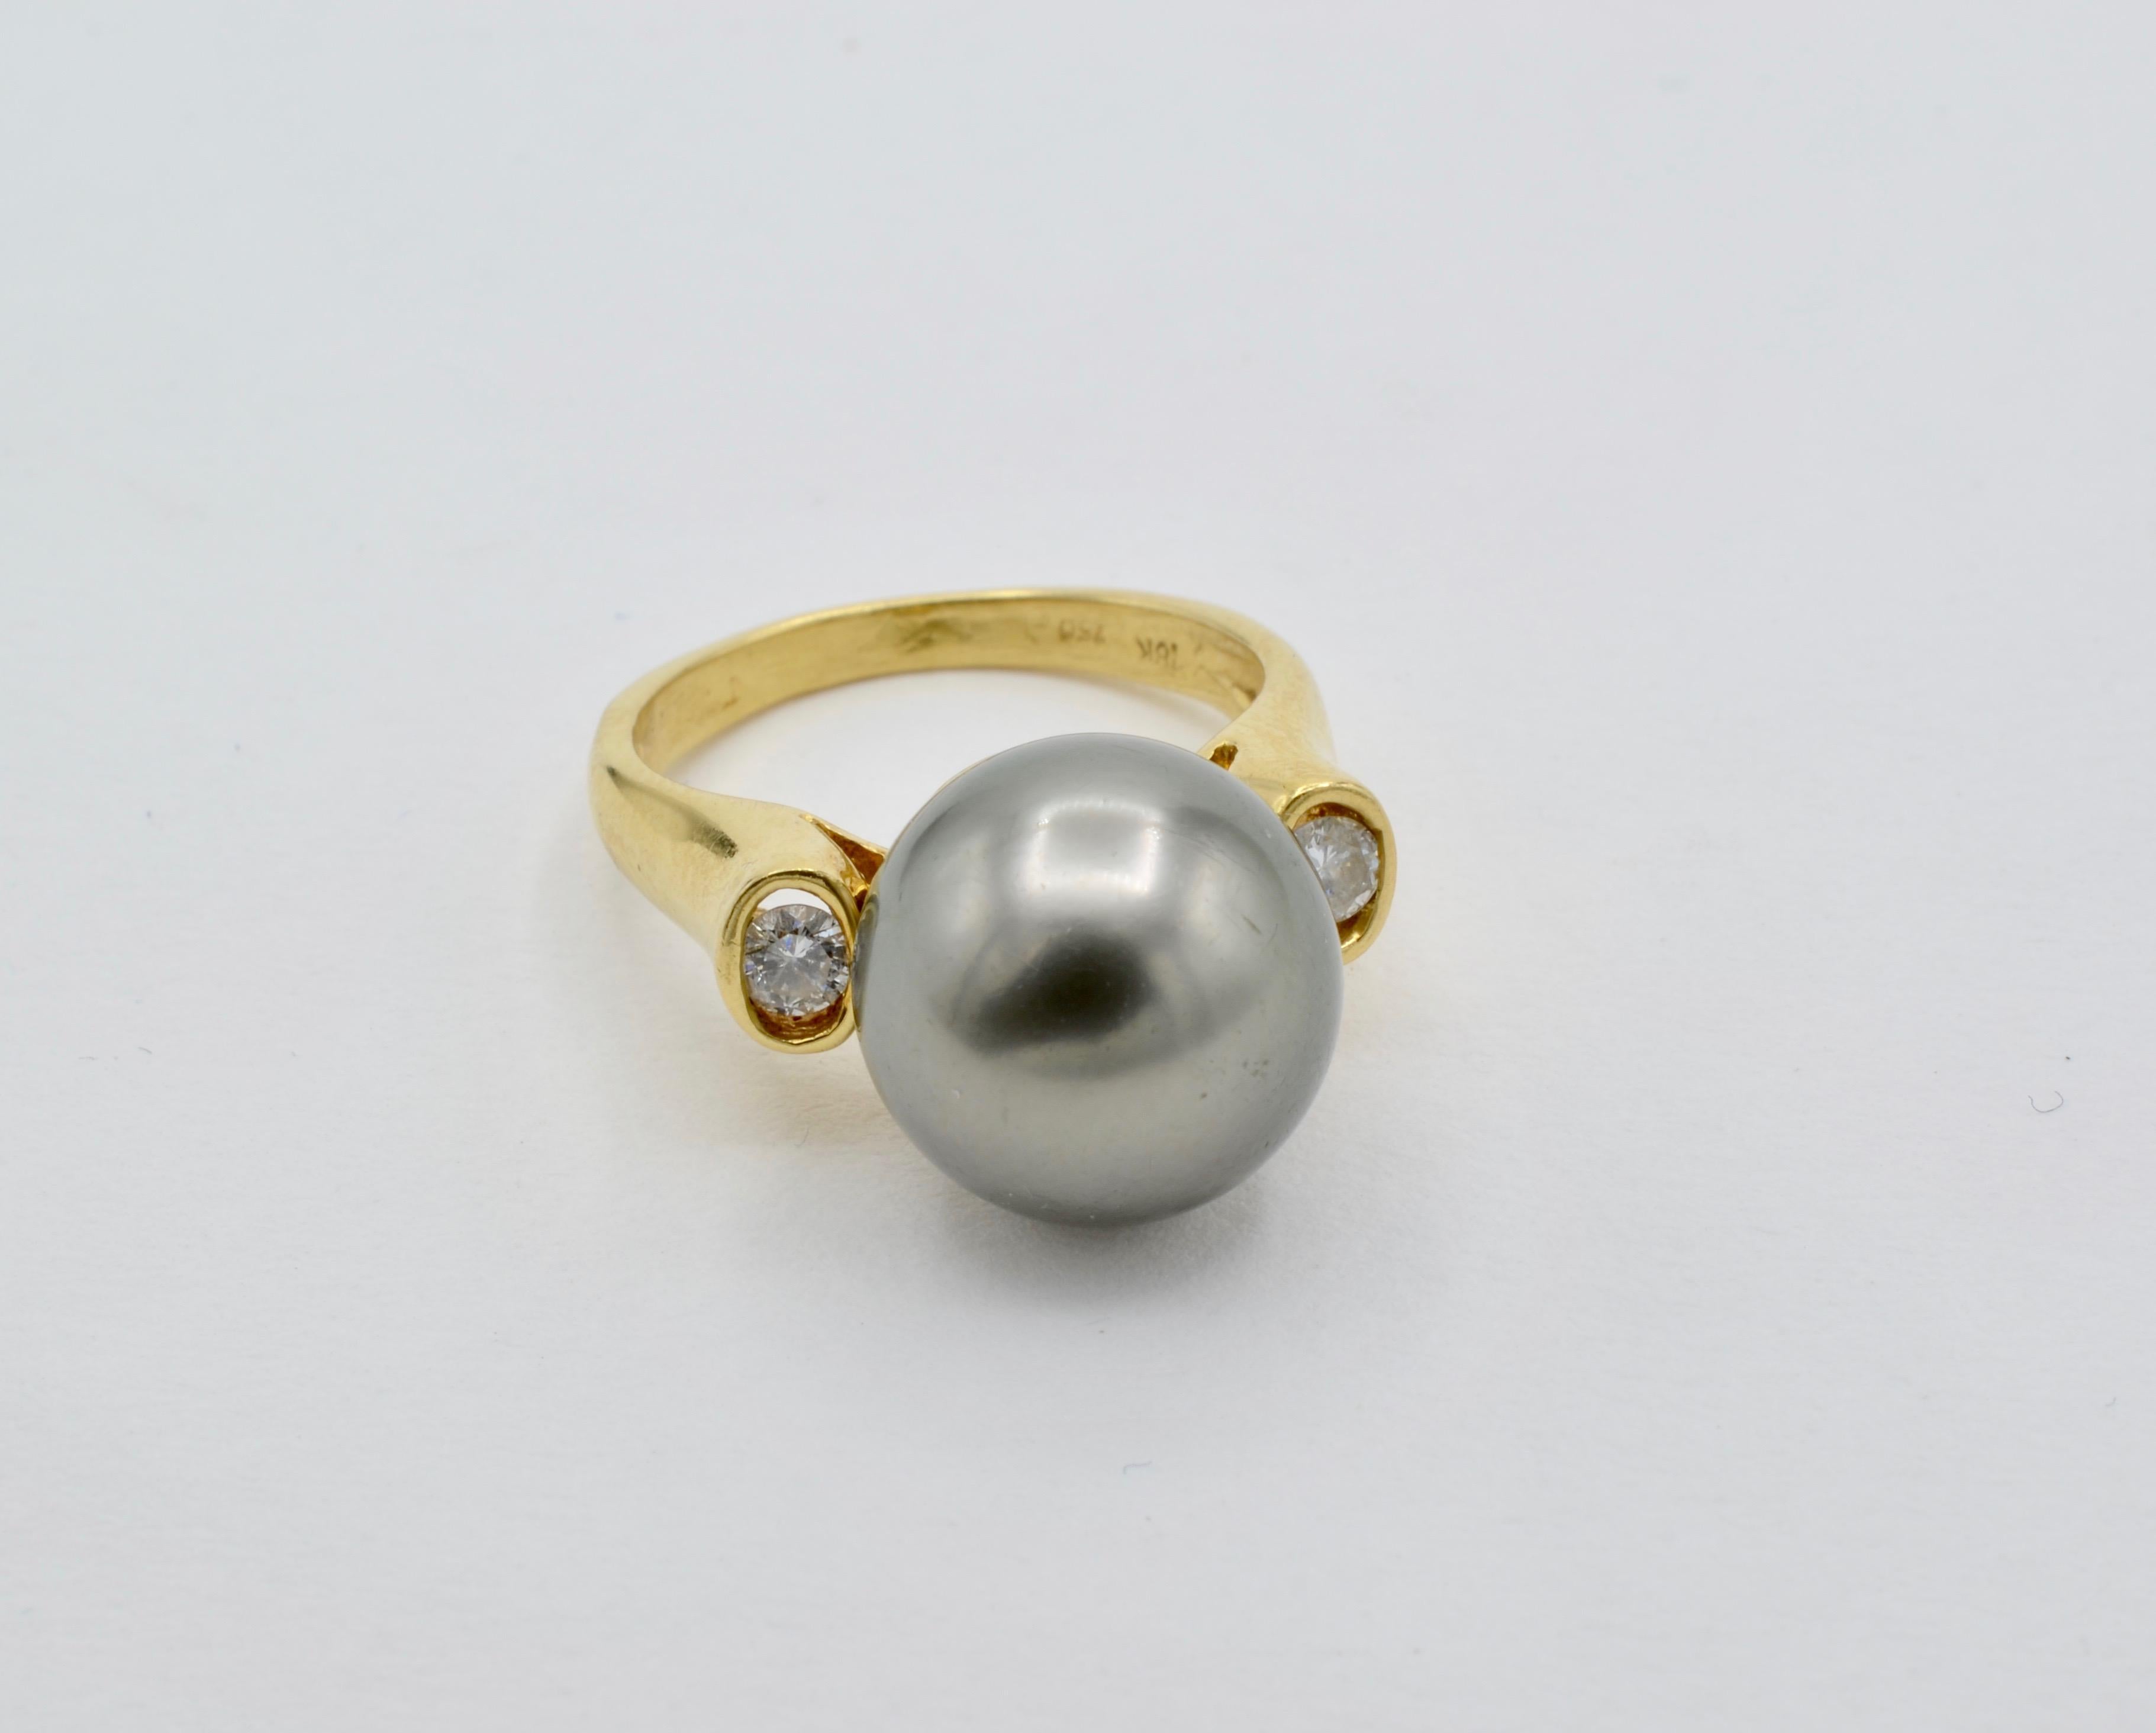 This beautiful Tahitian pearl is beautifully set in 18k gold with two round accent diamonds (aprox 0.20 tw ). The pearl sets high on the bezel to show off the beauty and size (13mm) of the pearl. The ring is a size 7 3/4 and can be sized to fit.



